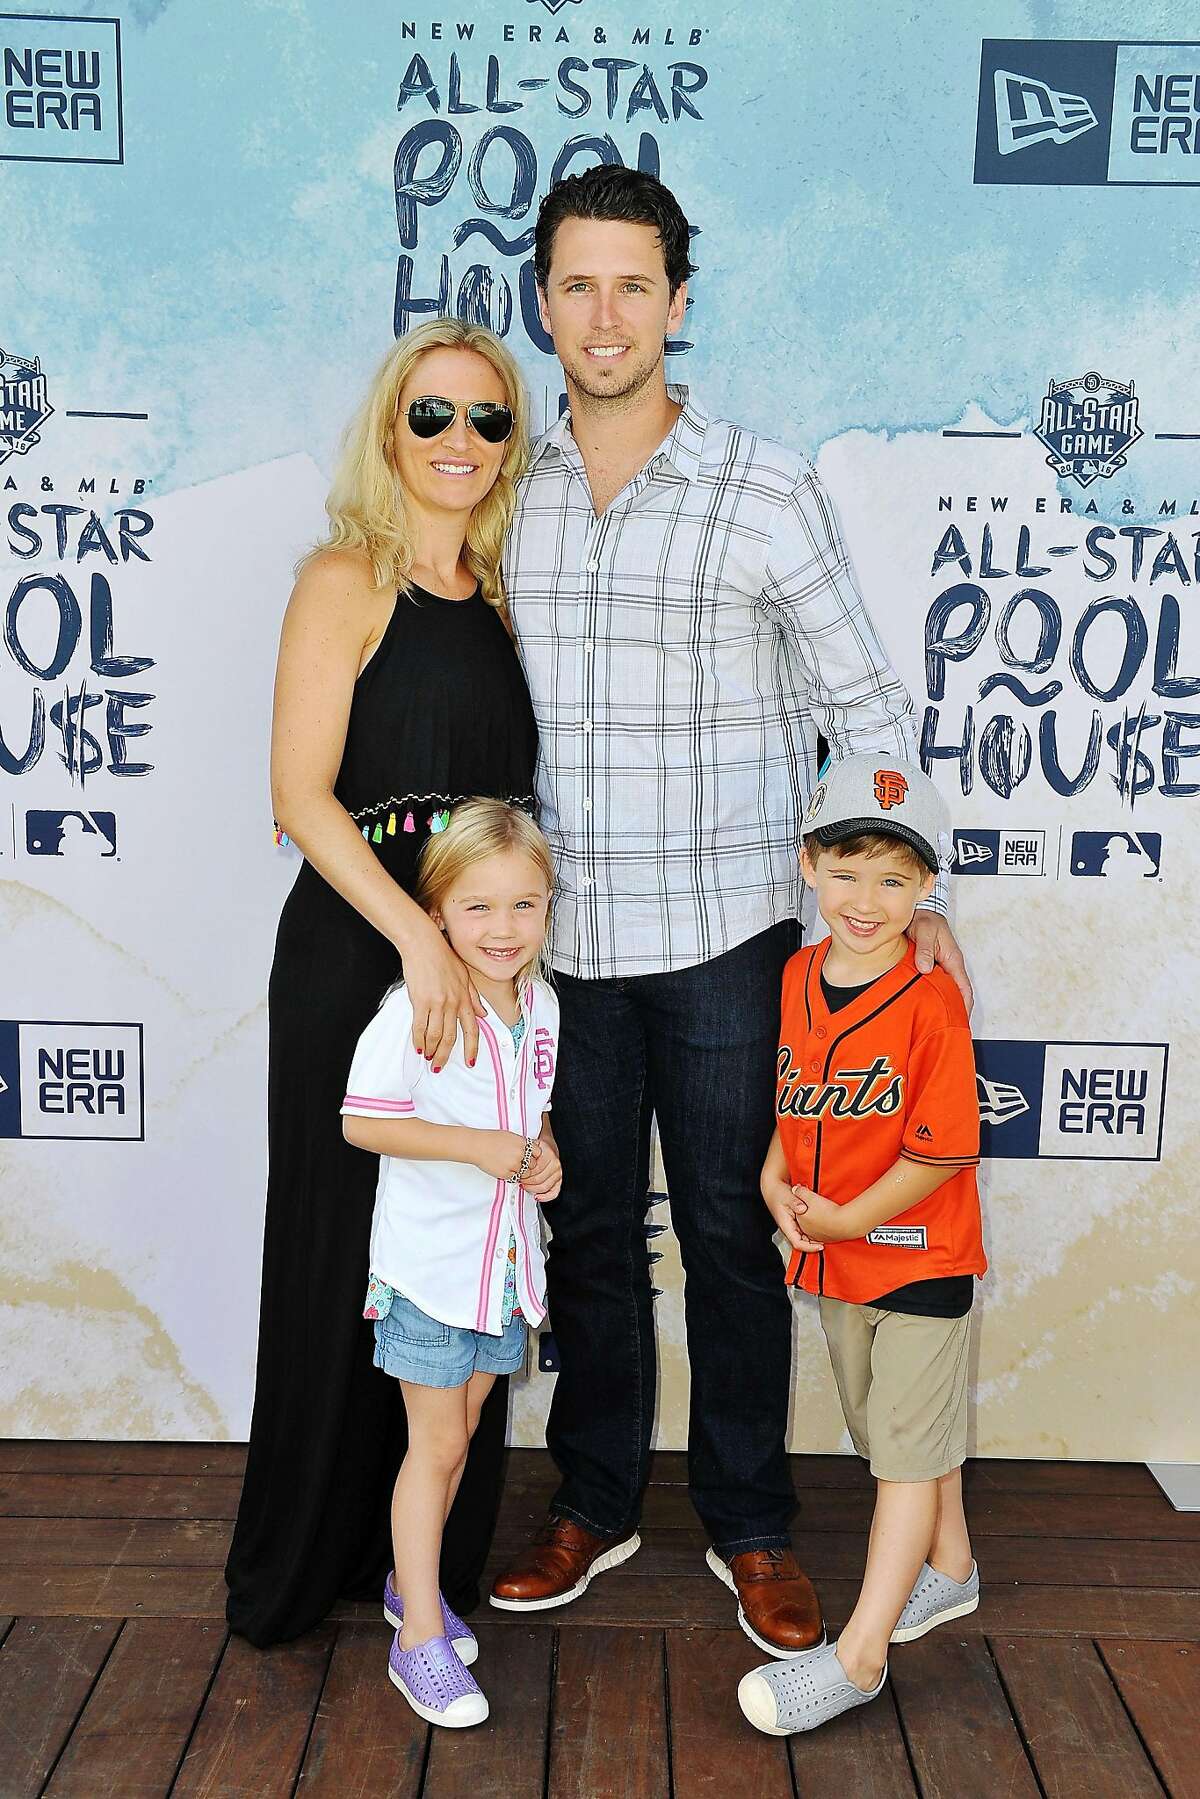 buster posey family